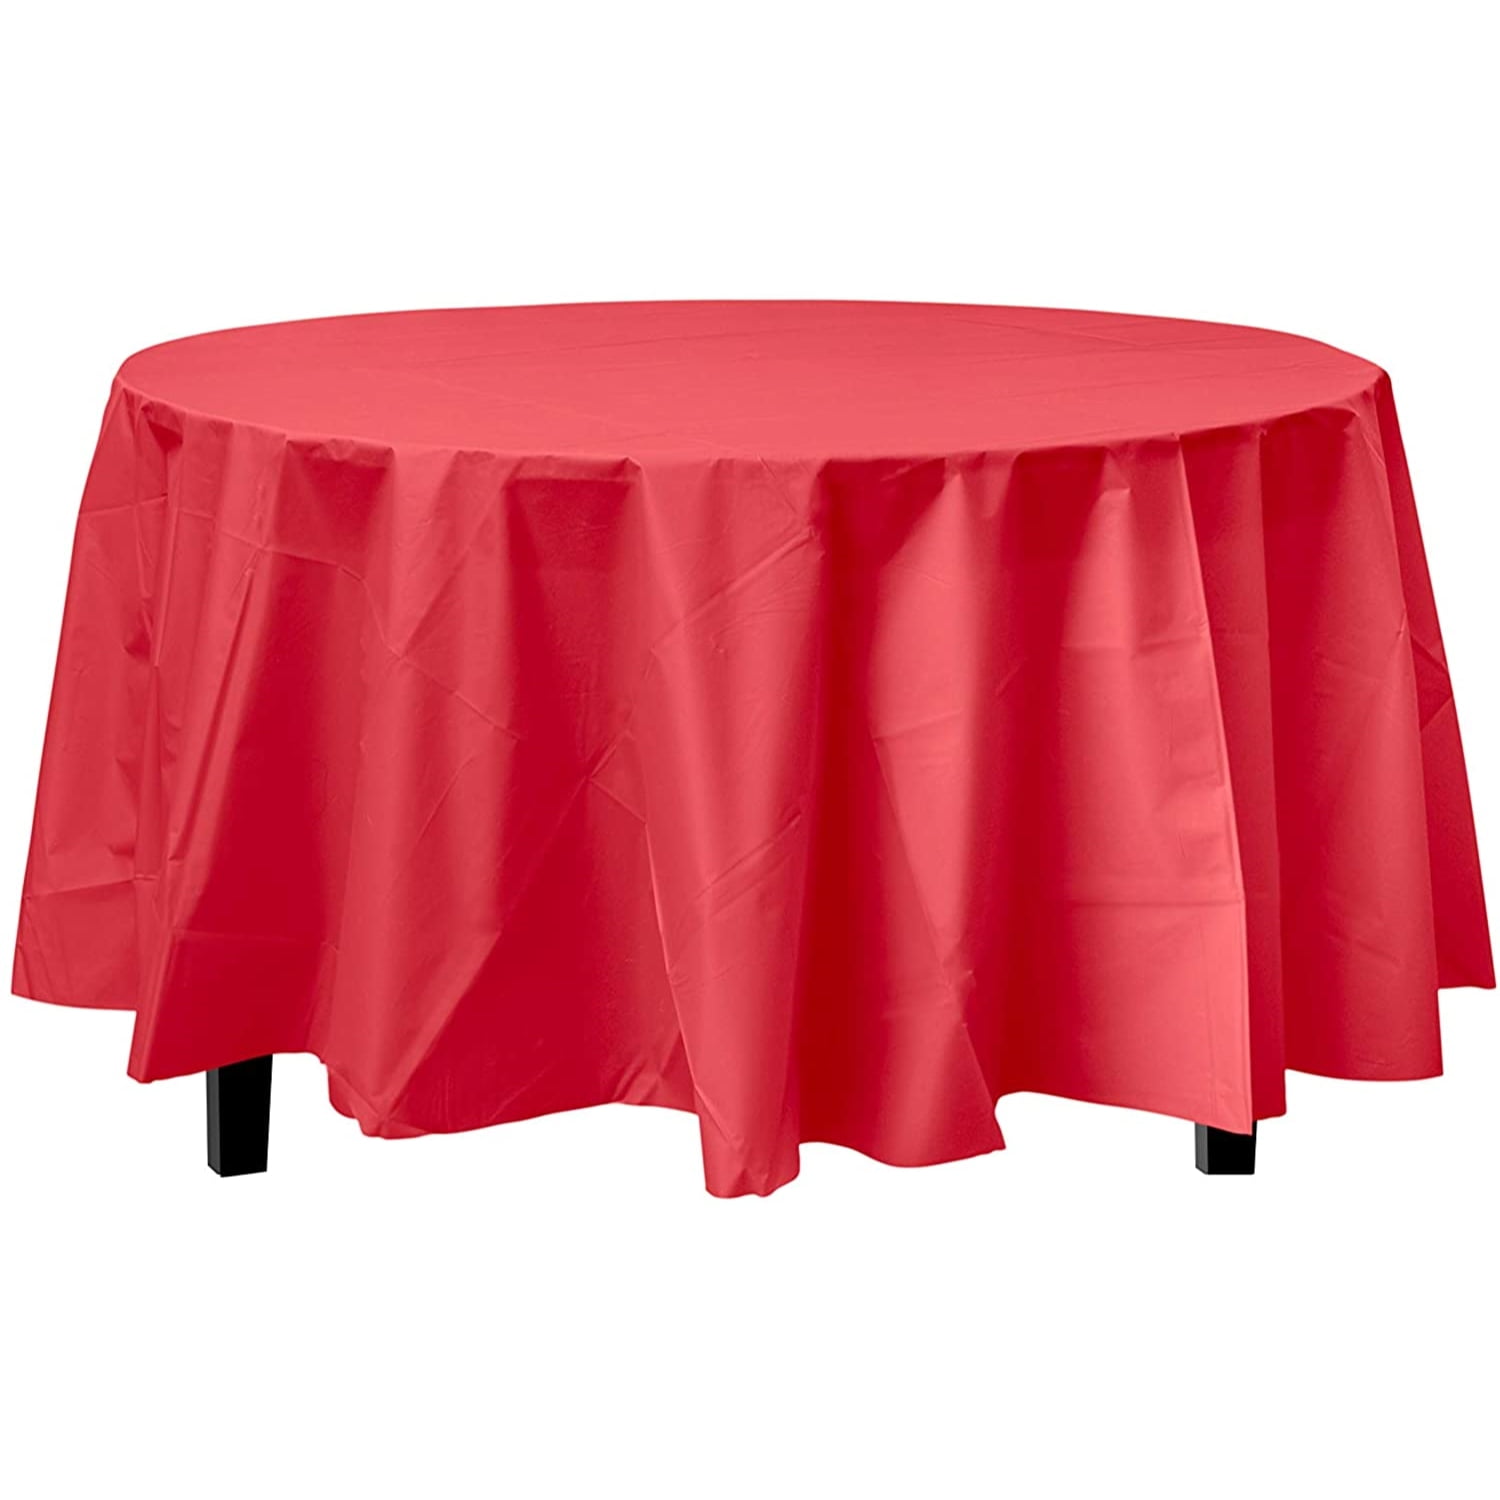 60" Round Tablecloth Red & White 